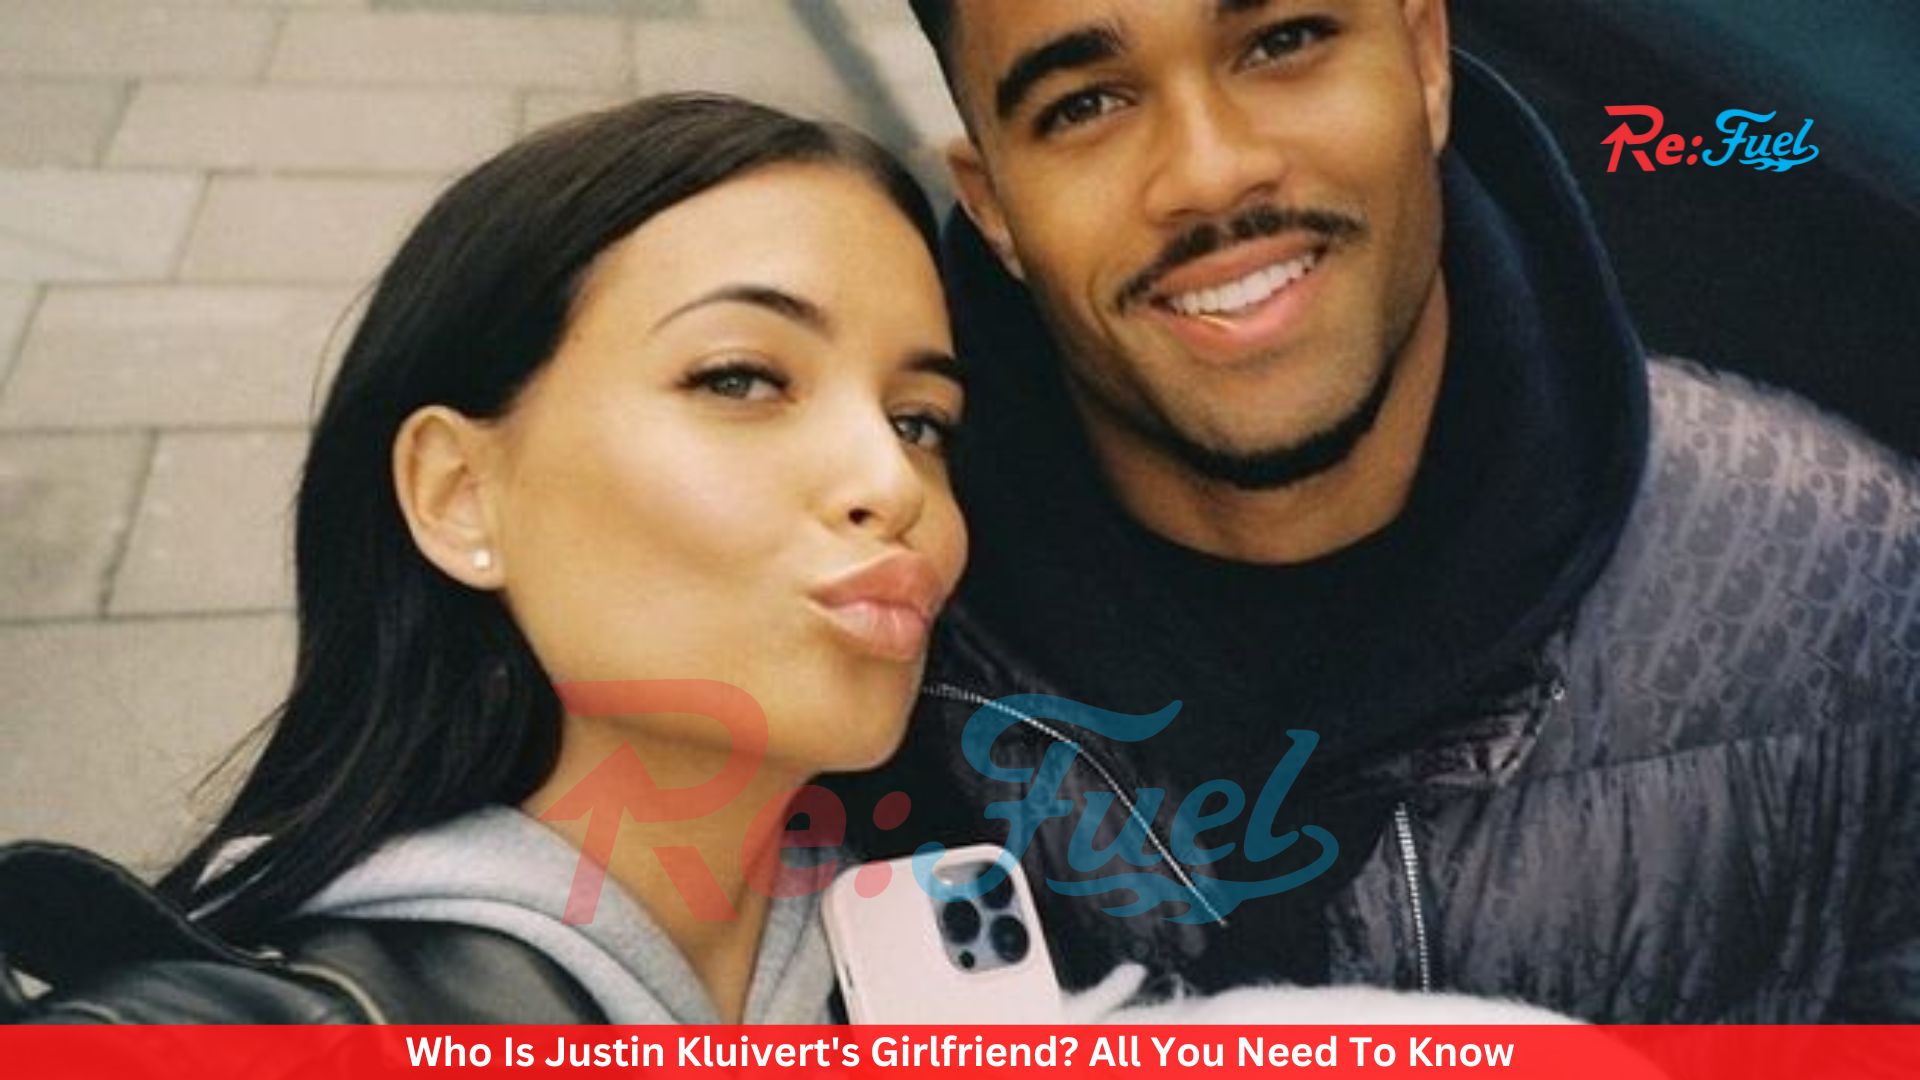 Who Is Justin Kluivert's Girlfriend? All You Need To Know